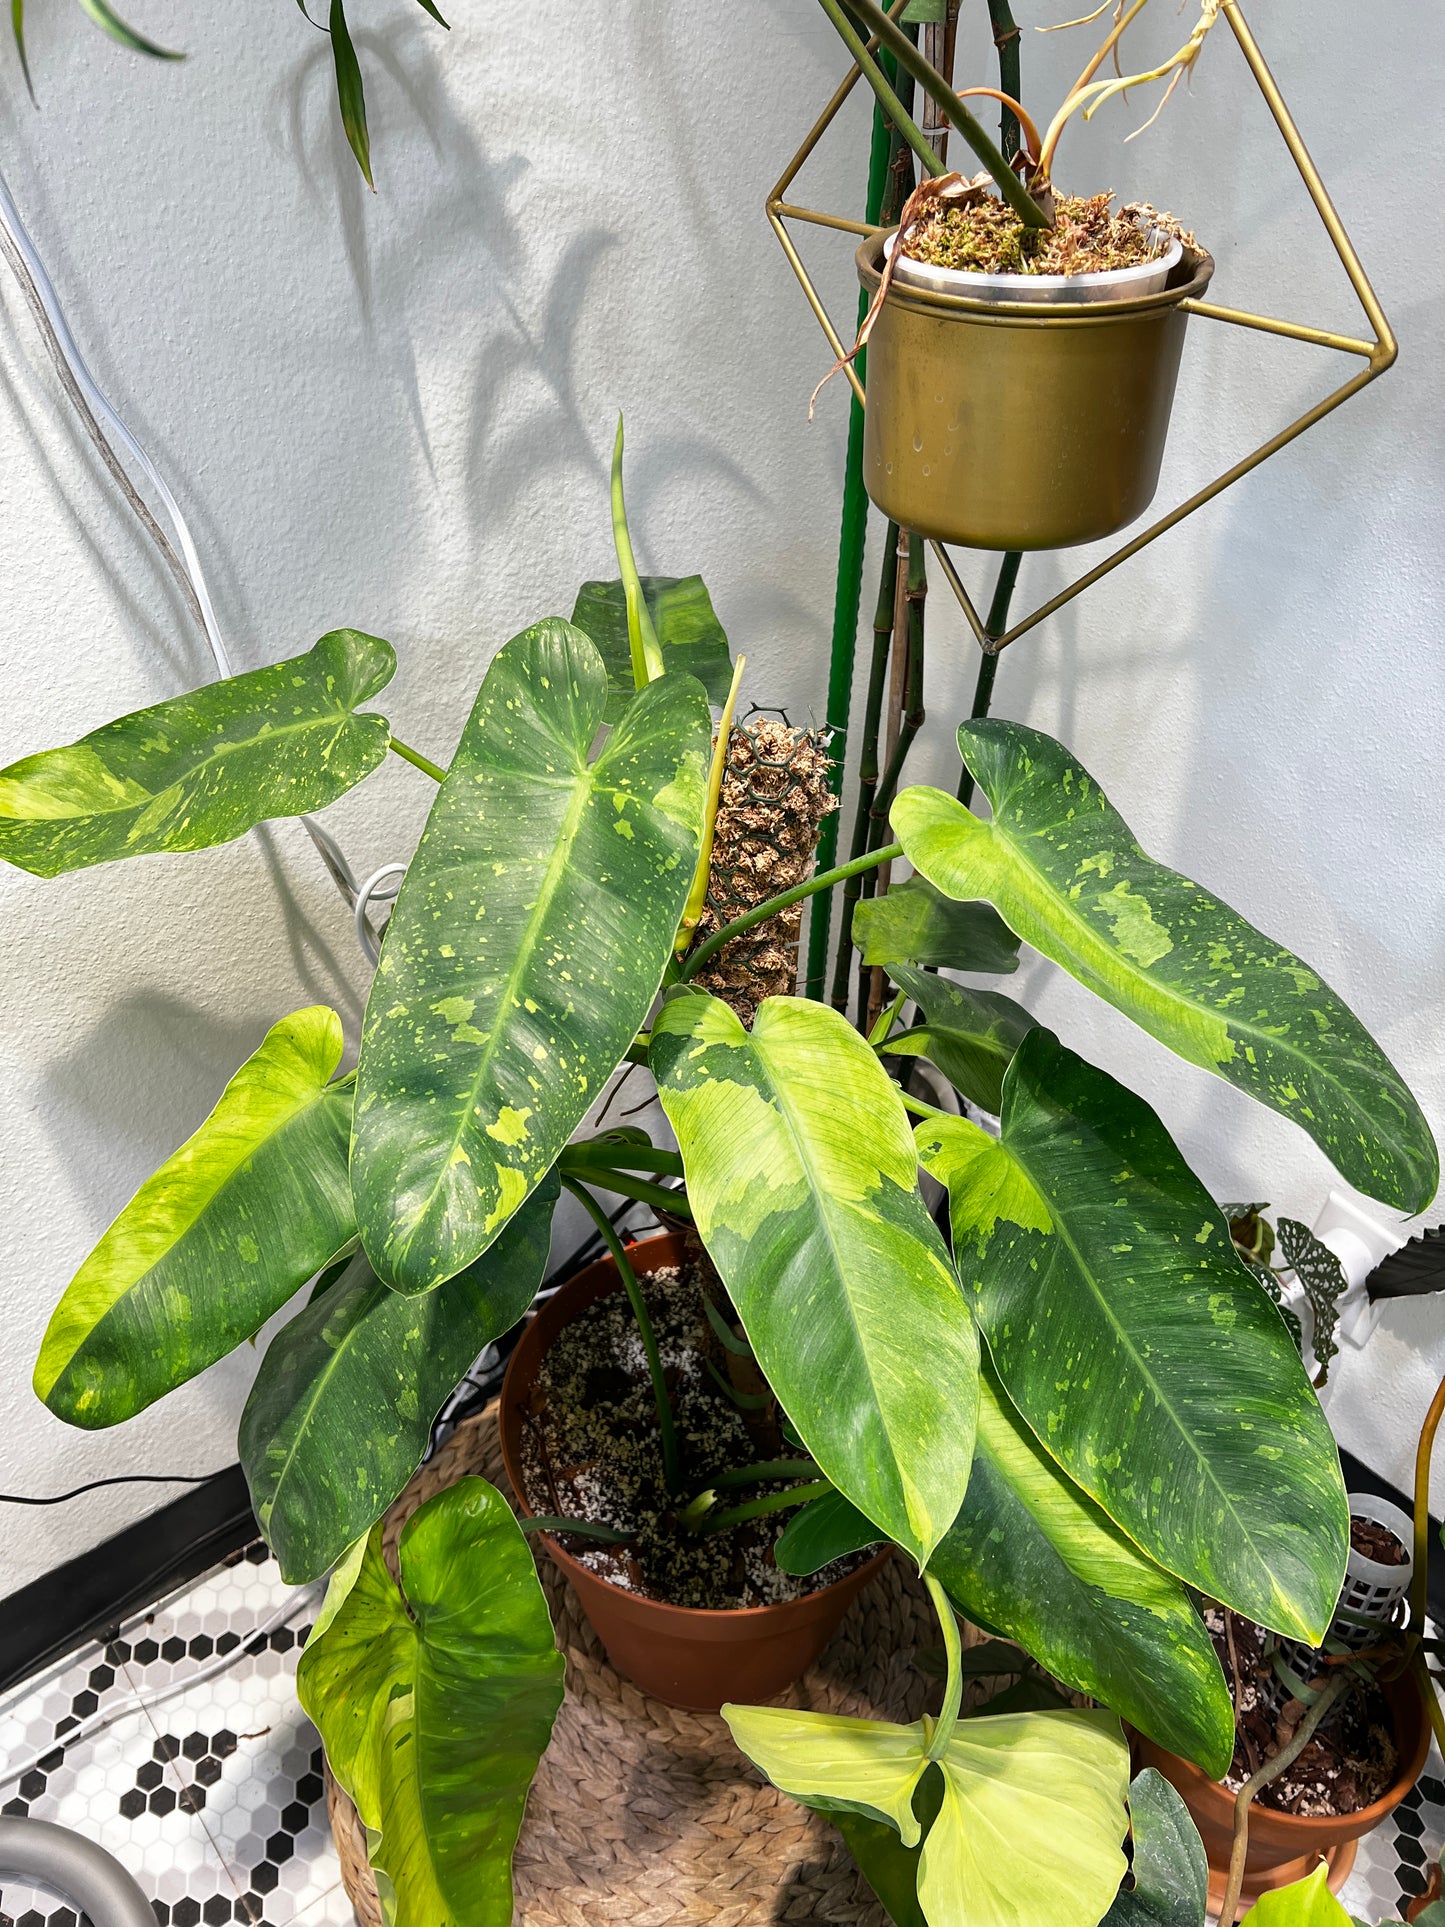 Philodendron jose buono rooted sprout from highly Variegated mother plant